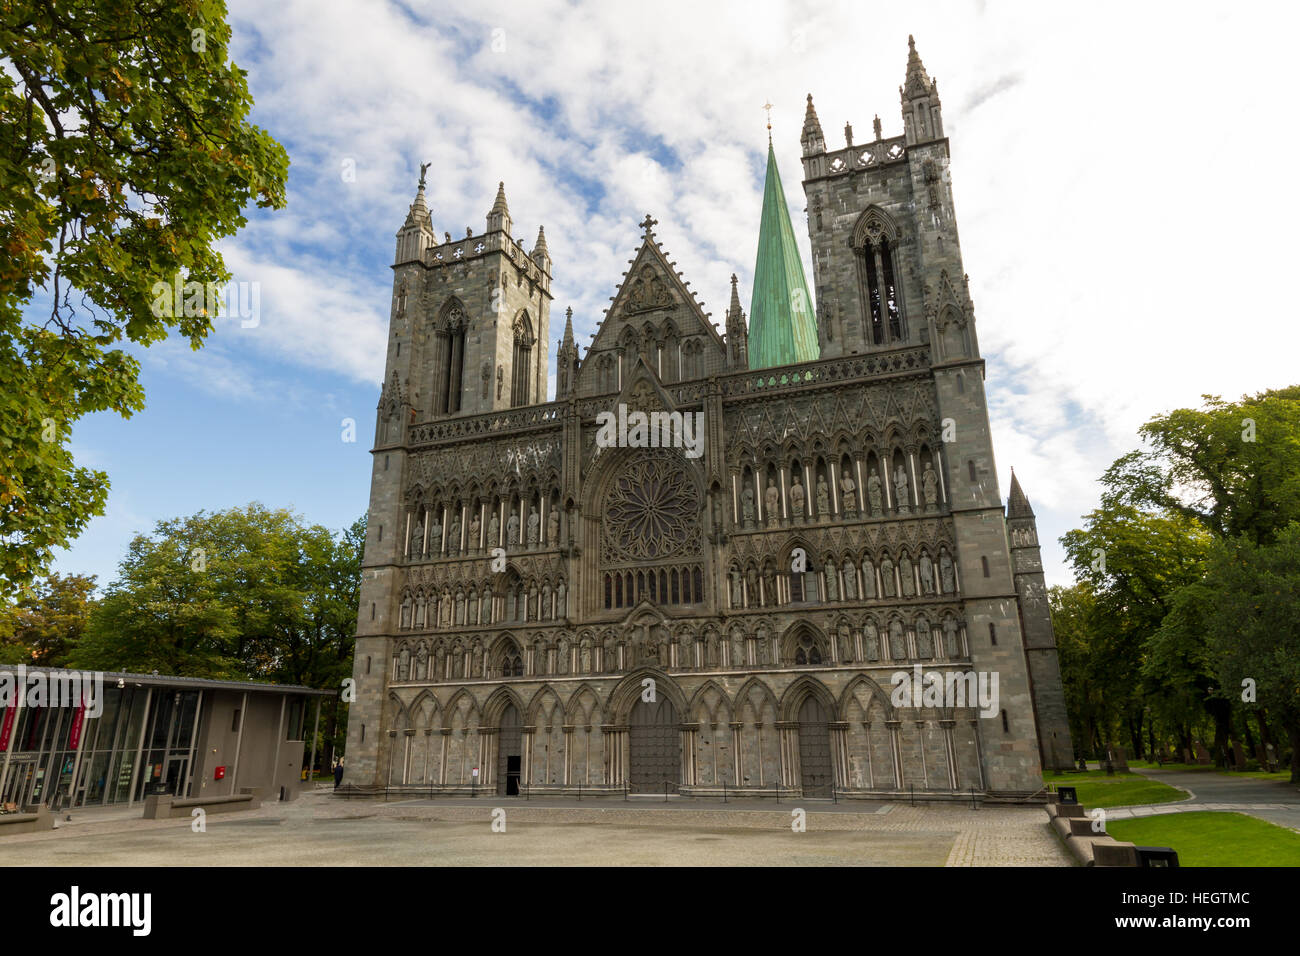 Nidaros cathedral of Trondheim - the northernmost medieval cathedral in the world, Norway Stock Photo